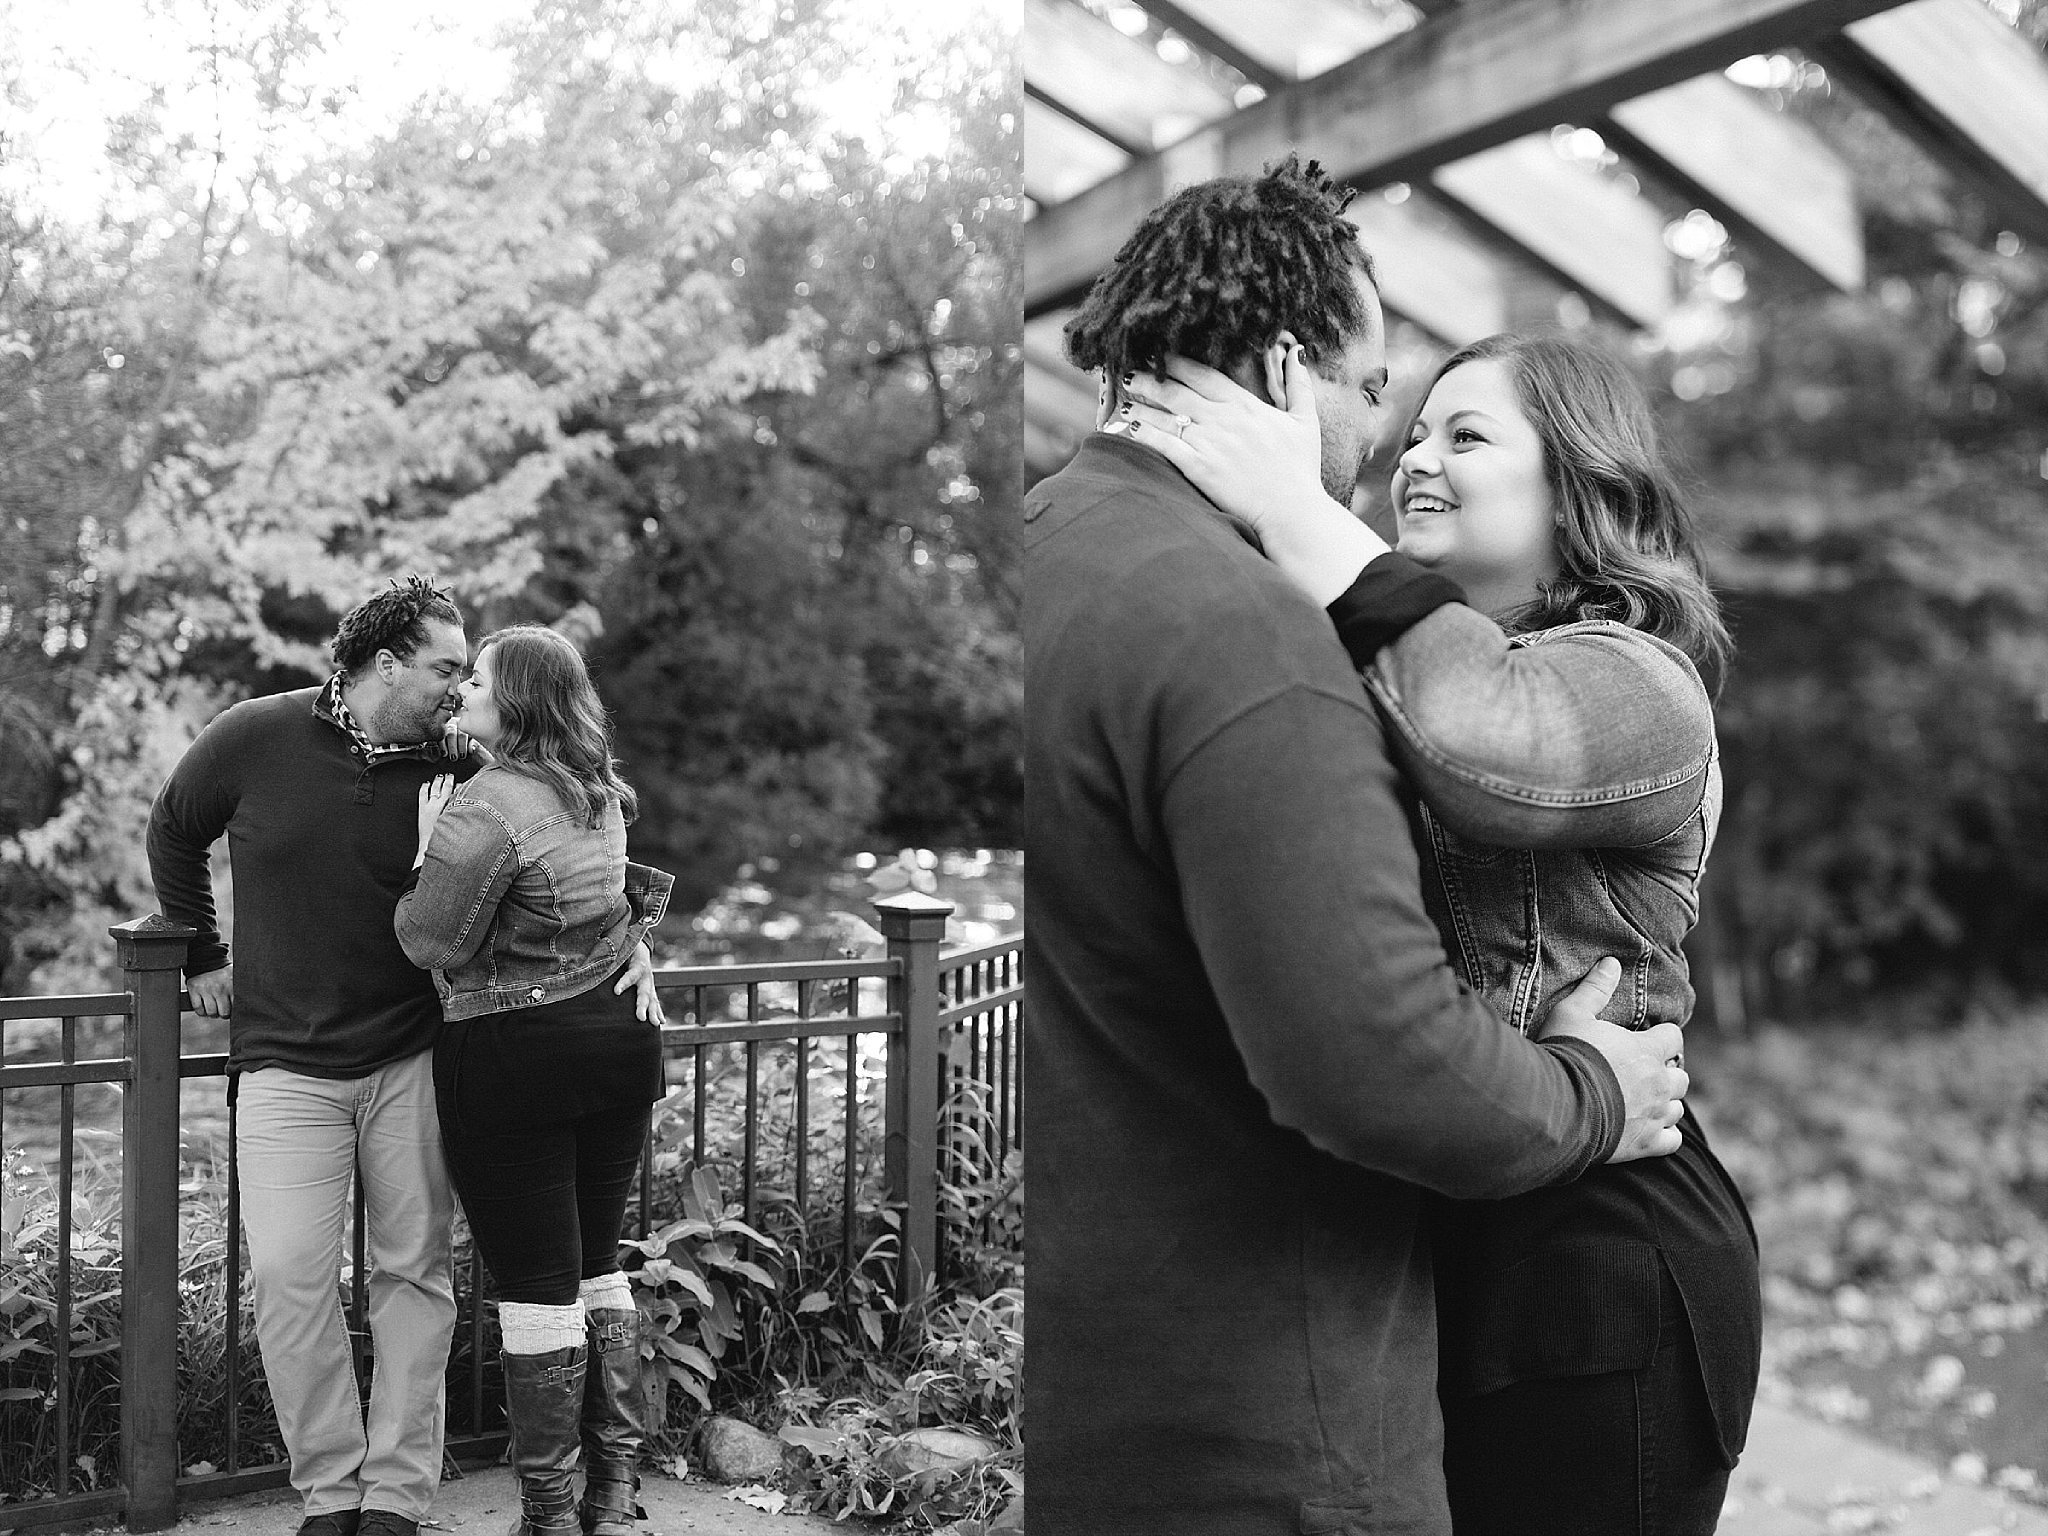 Engagement photos - Central Wisconsin photographer